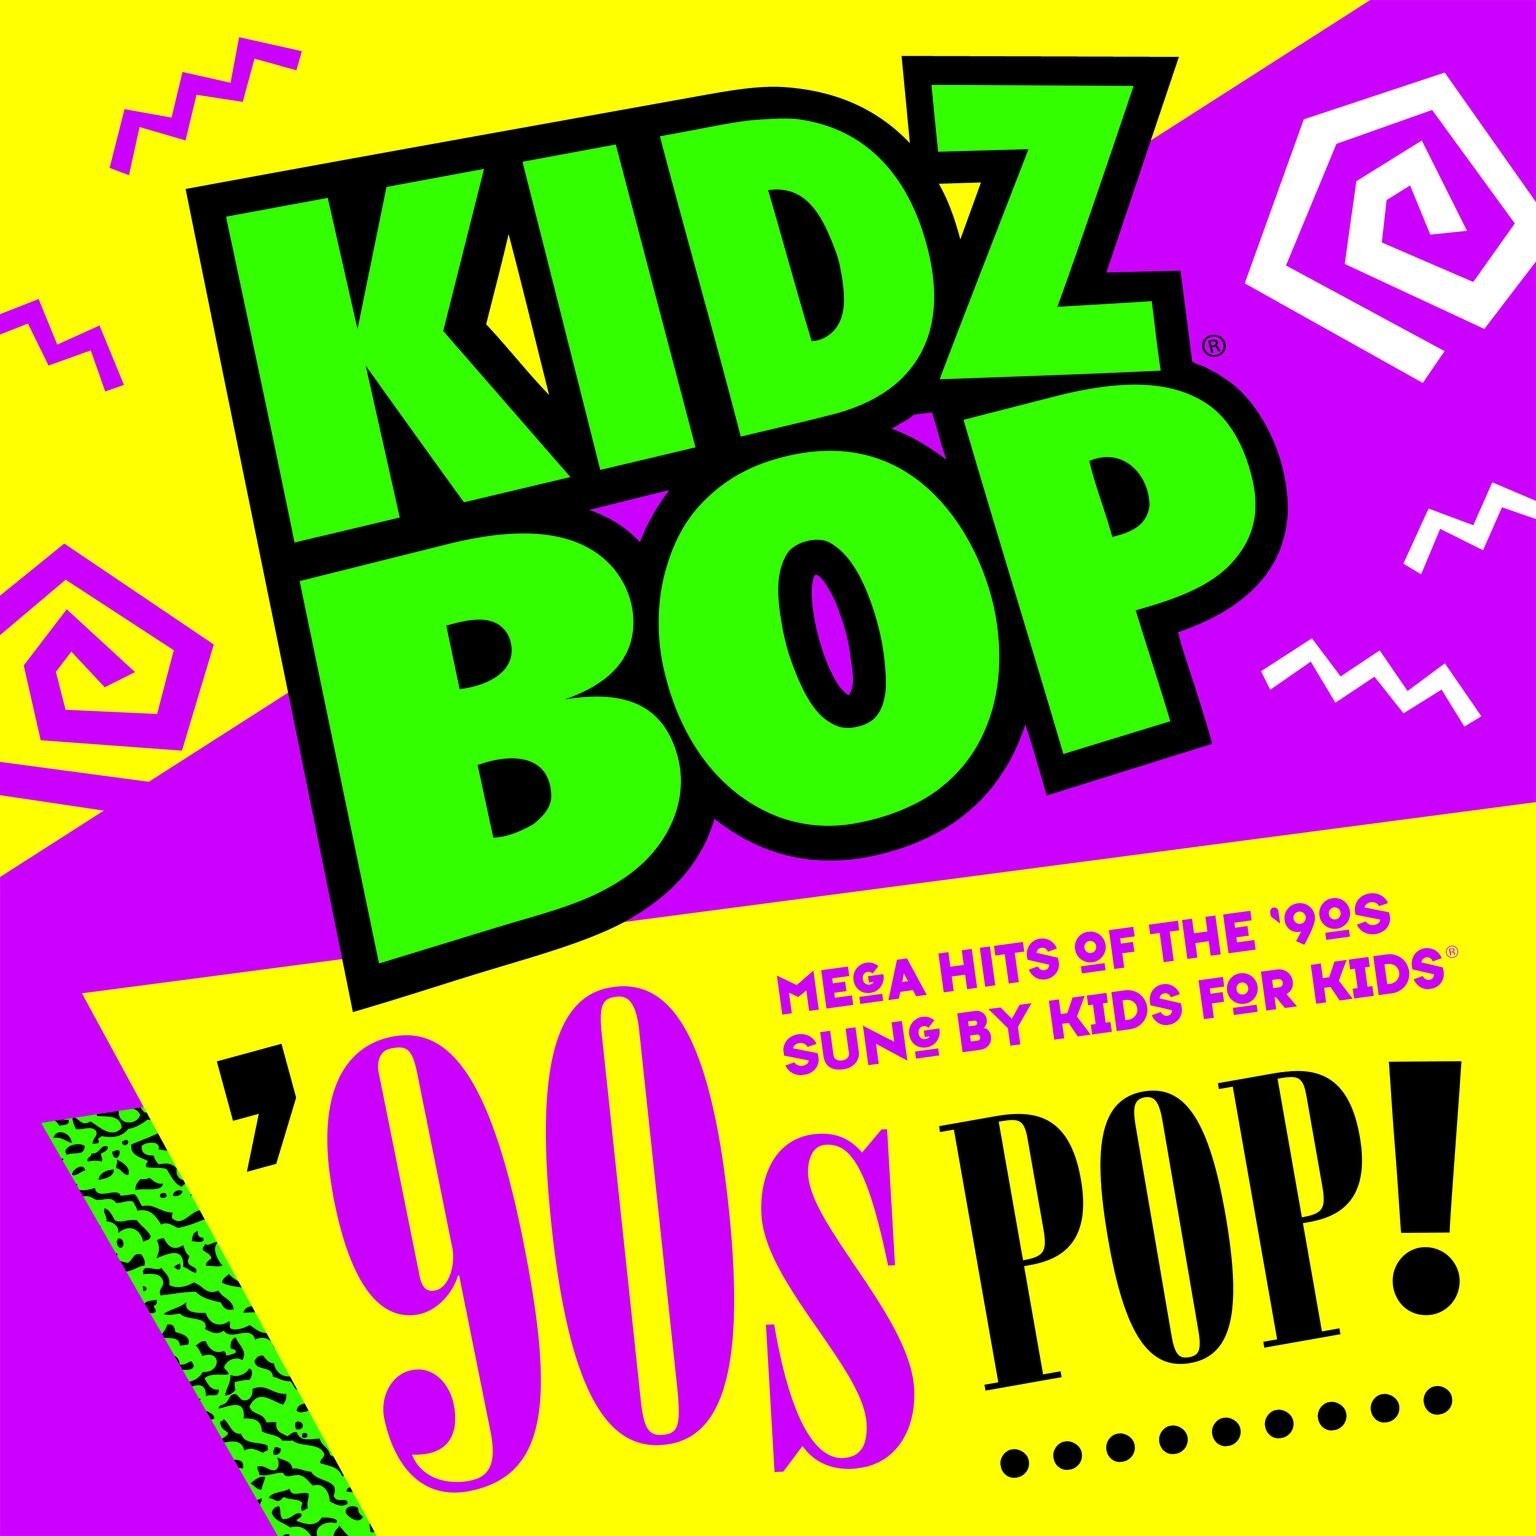 Kidz Bop Just Released An Album Of Ancient Music From The Historical